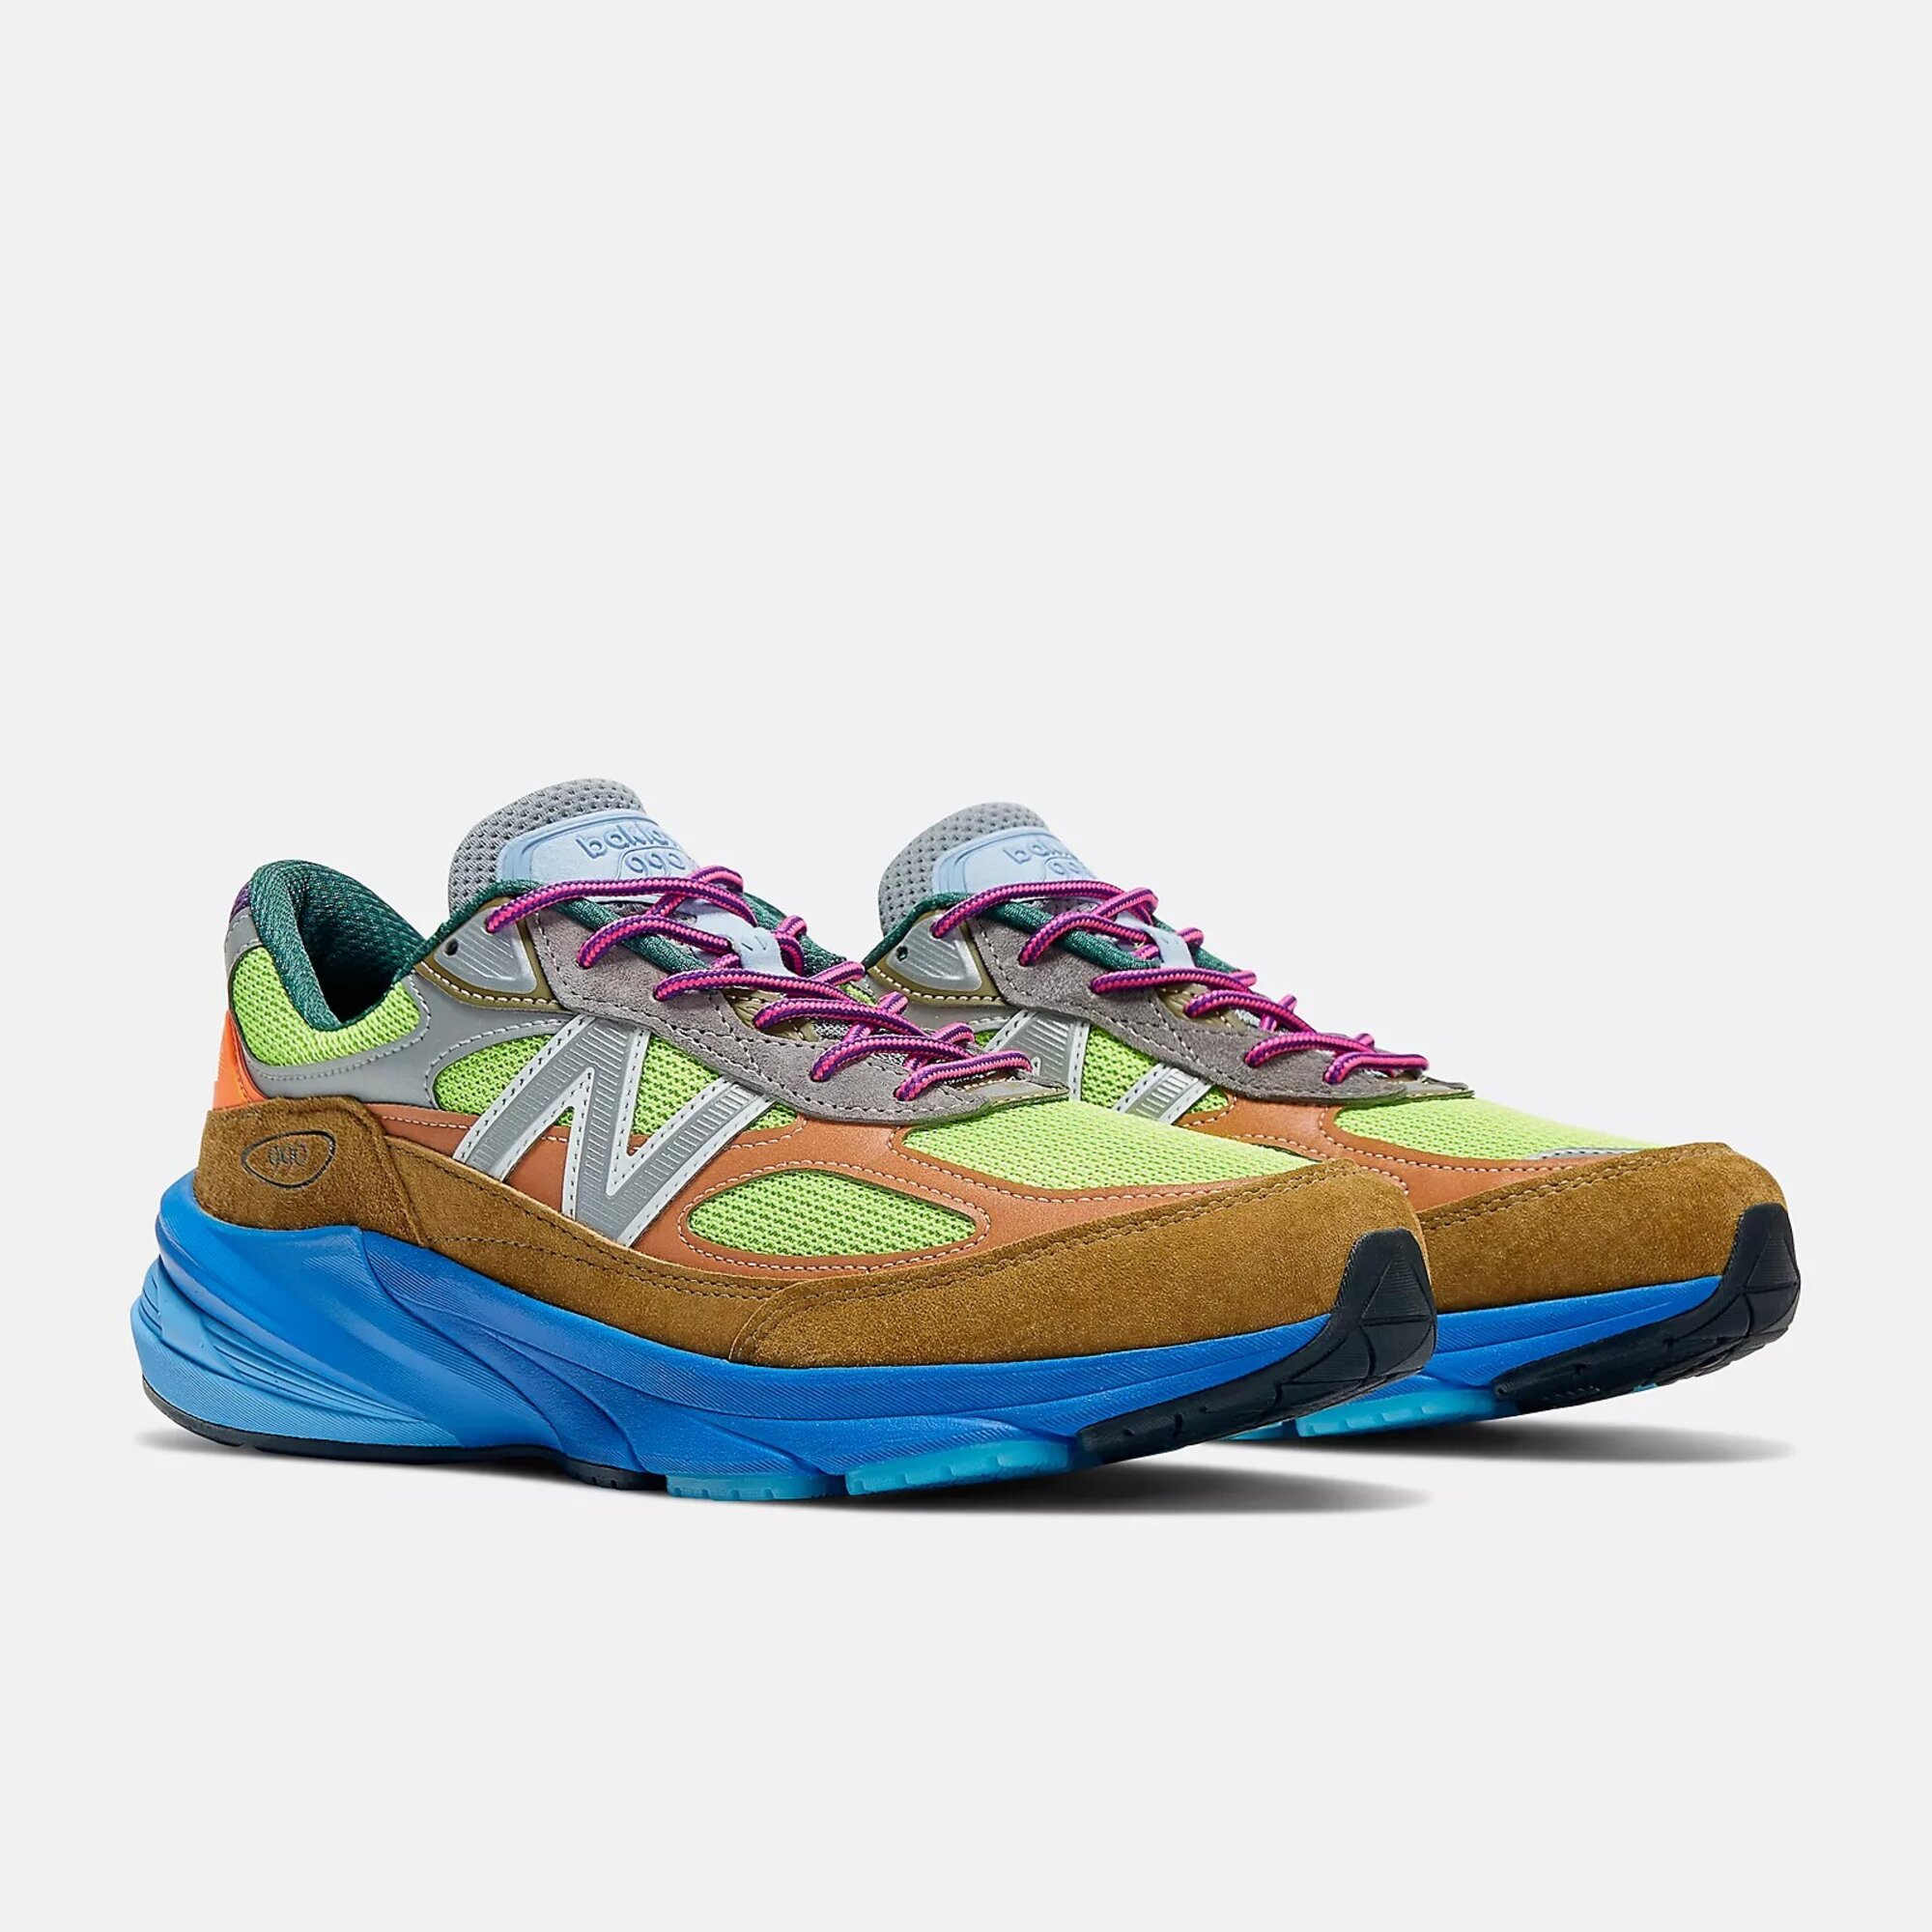 Action Bronson x New Balance 990v6 MADE in USA